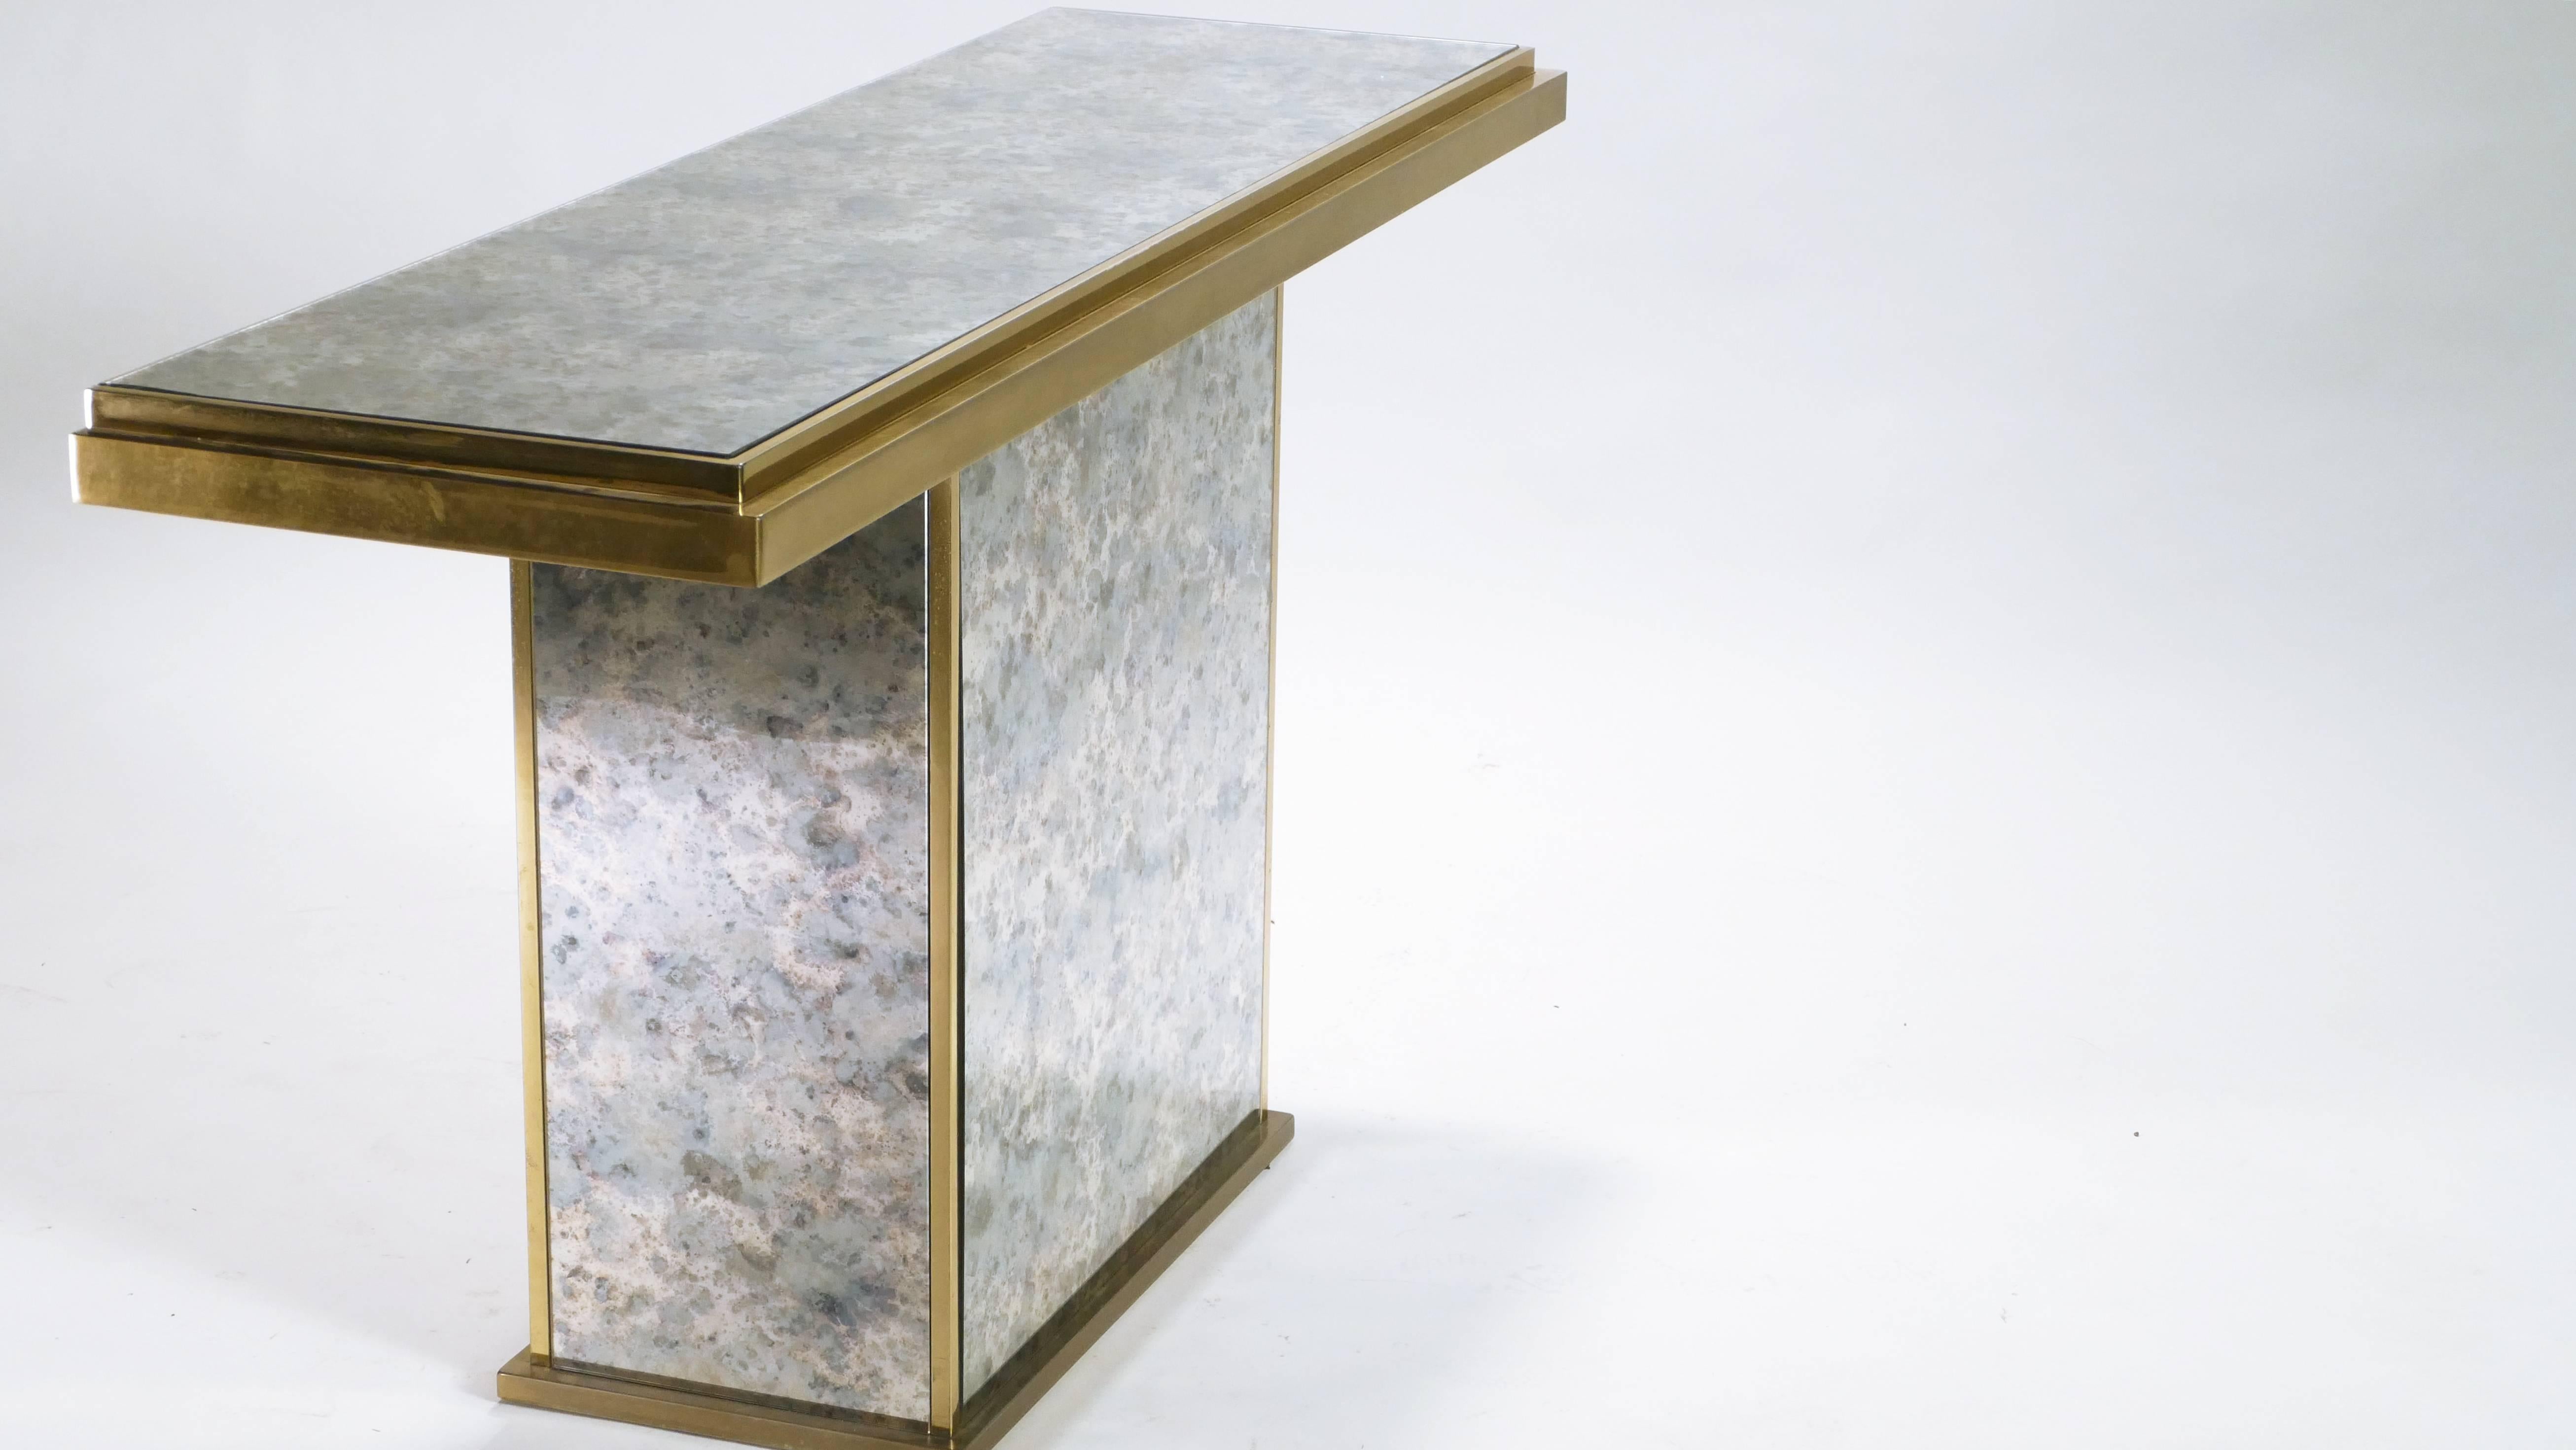 Extravagant brass details and an aged, mirrored surface make this gorgeous midcentury console an example of the Hollywood regency style that championed decorative and decidedly luxurious design. Its neutral, dappled color and strong, simple